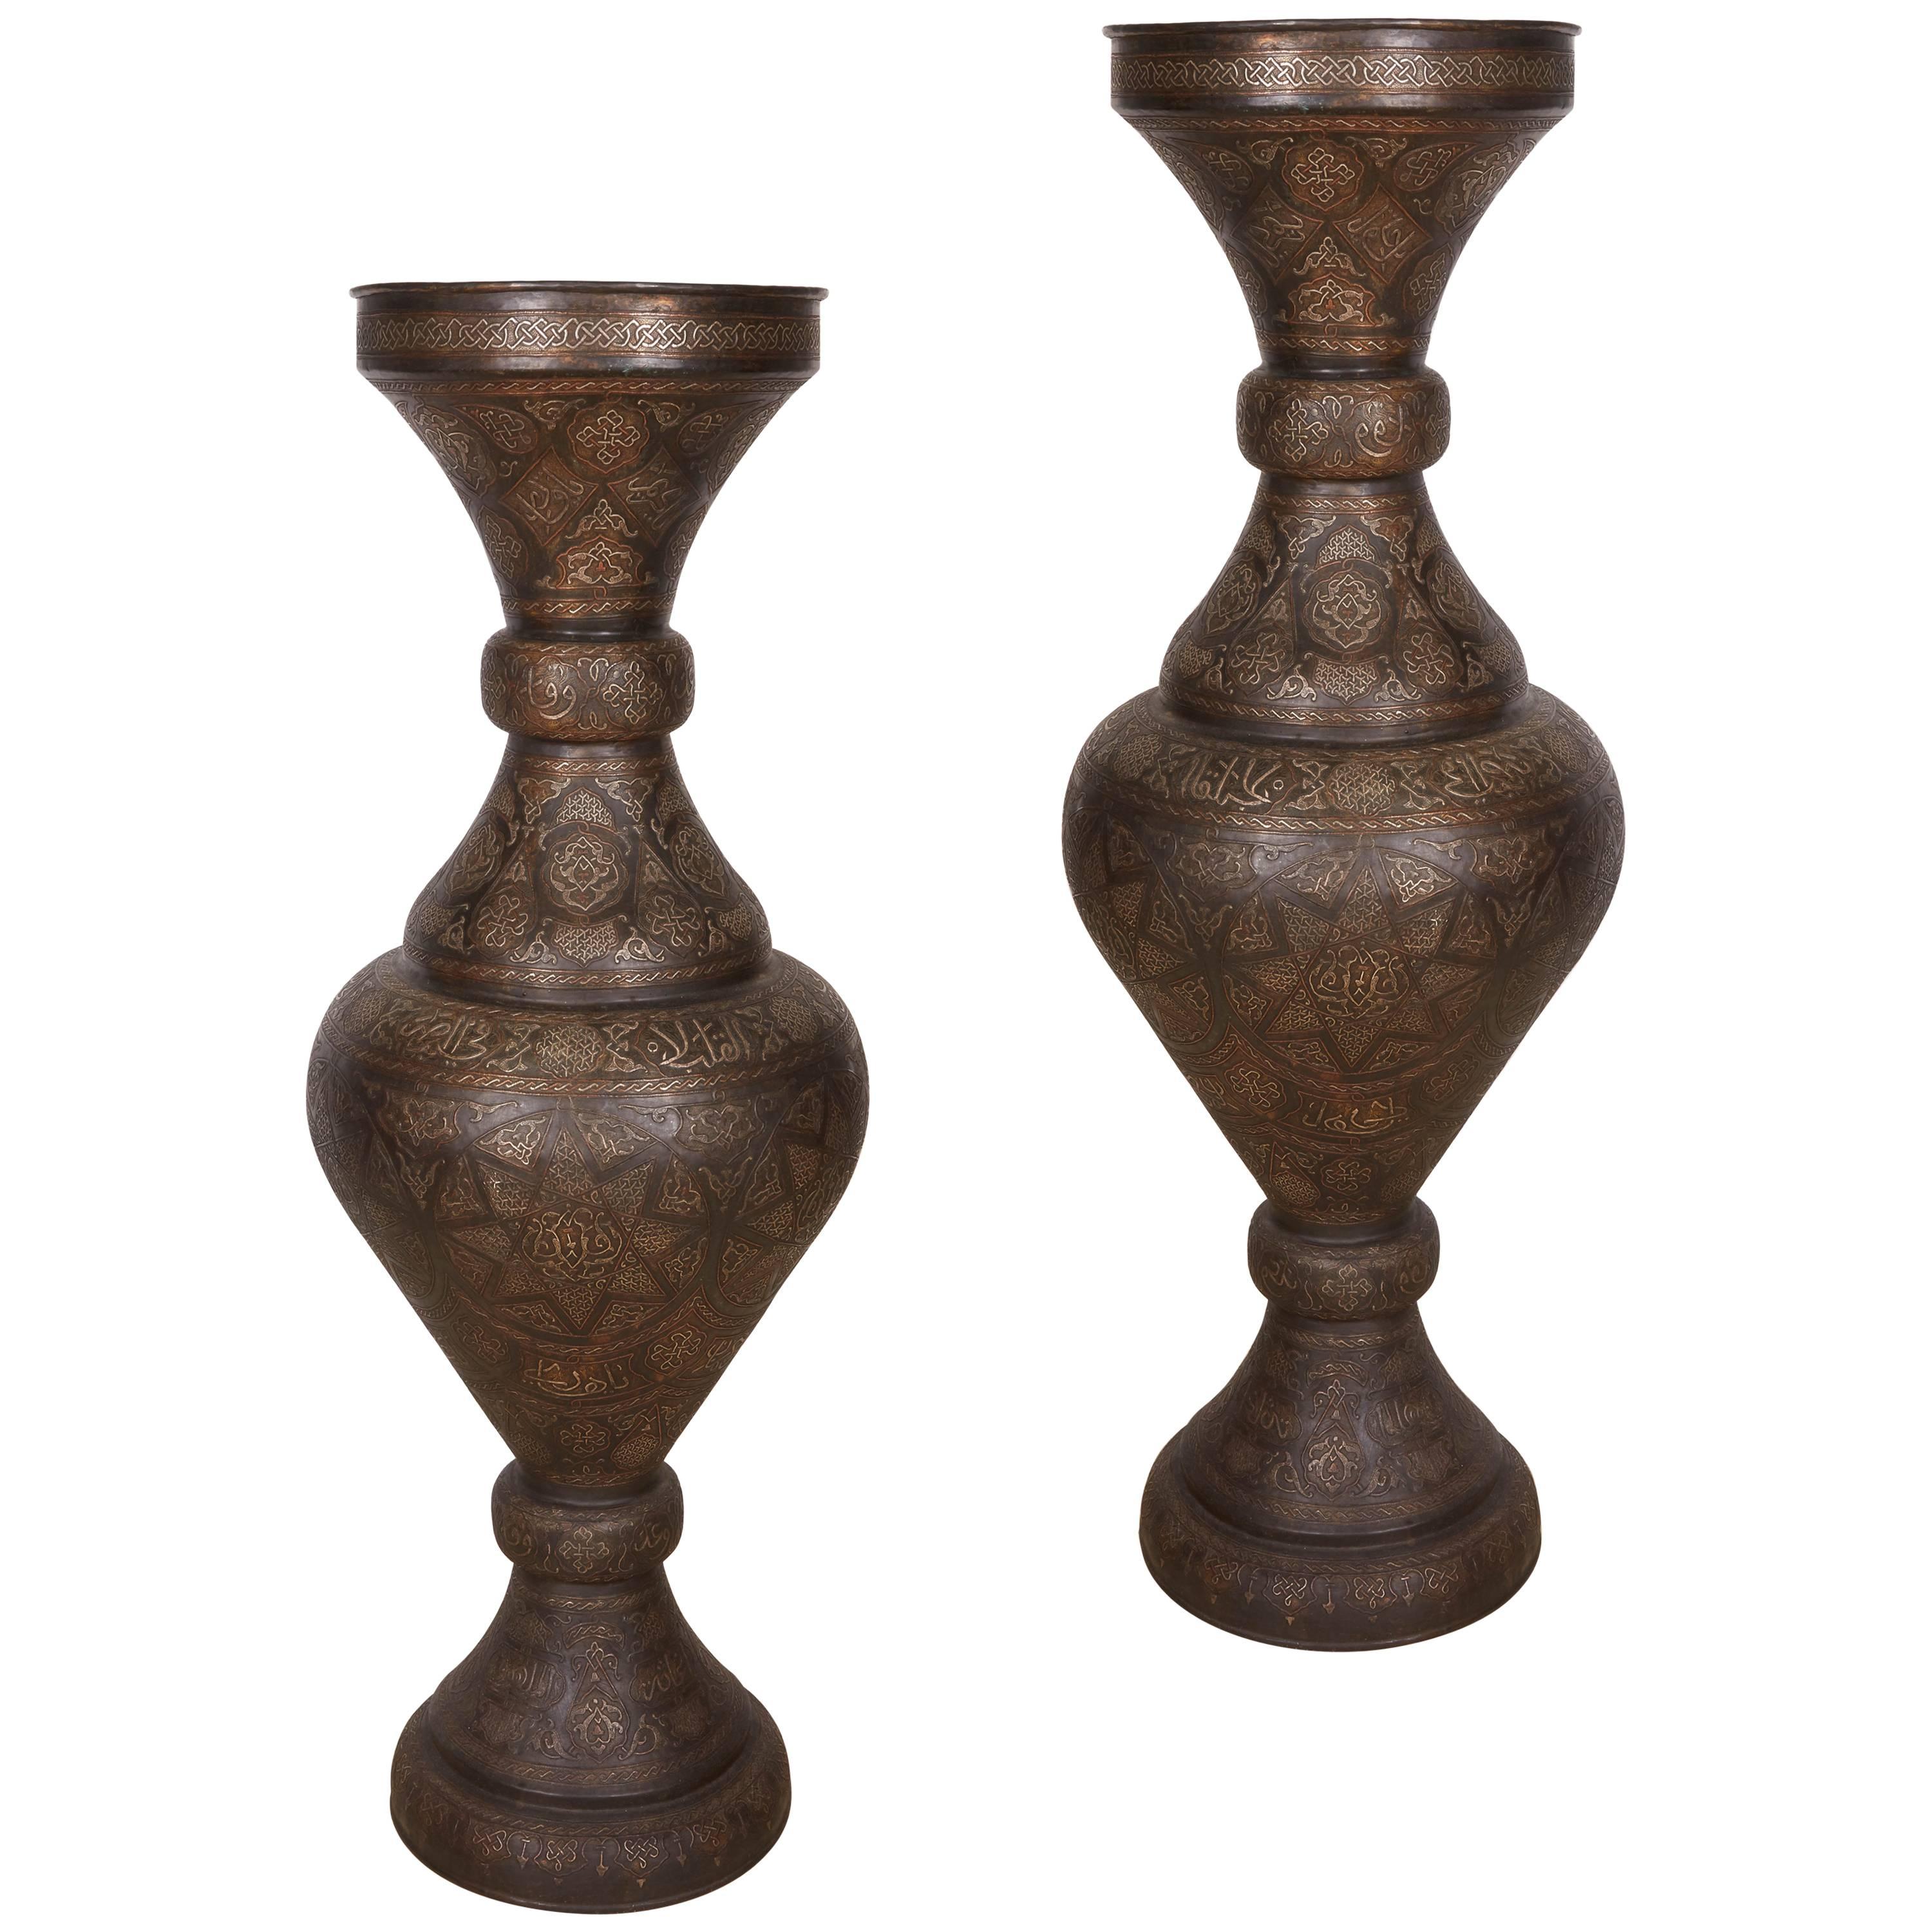 Monumental Pair of Islamic Silver Inlaid Palace Vases with Arabic Calligraphy